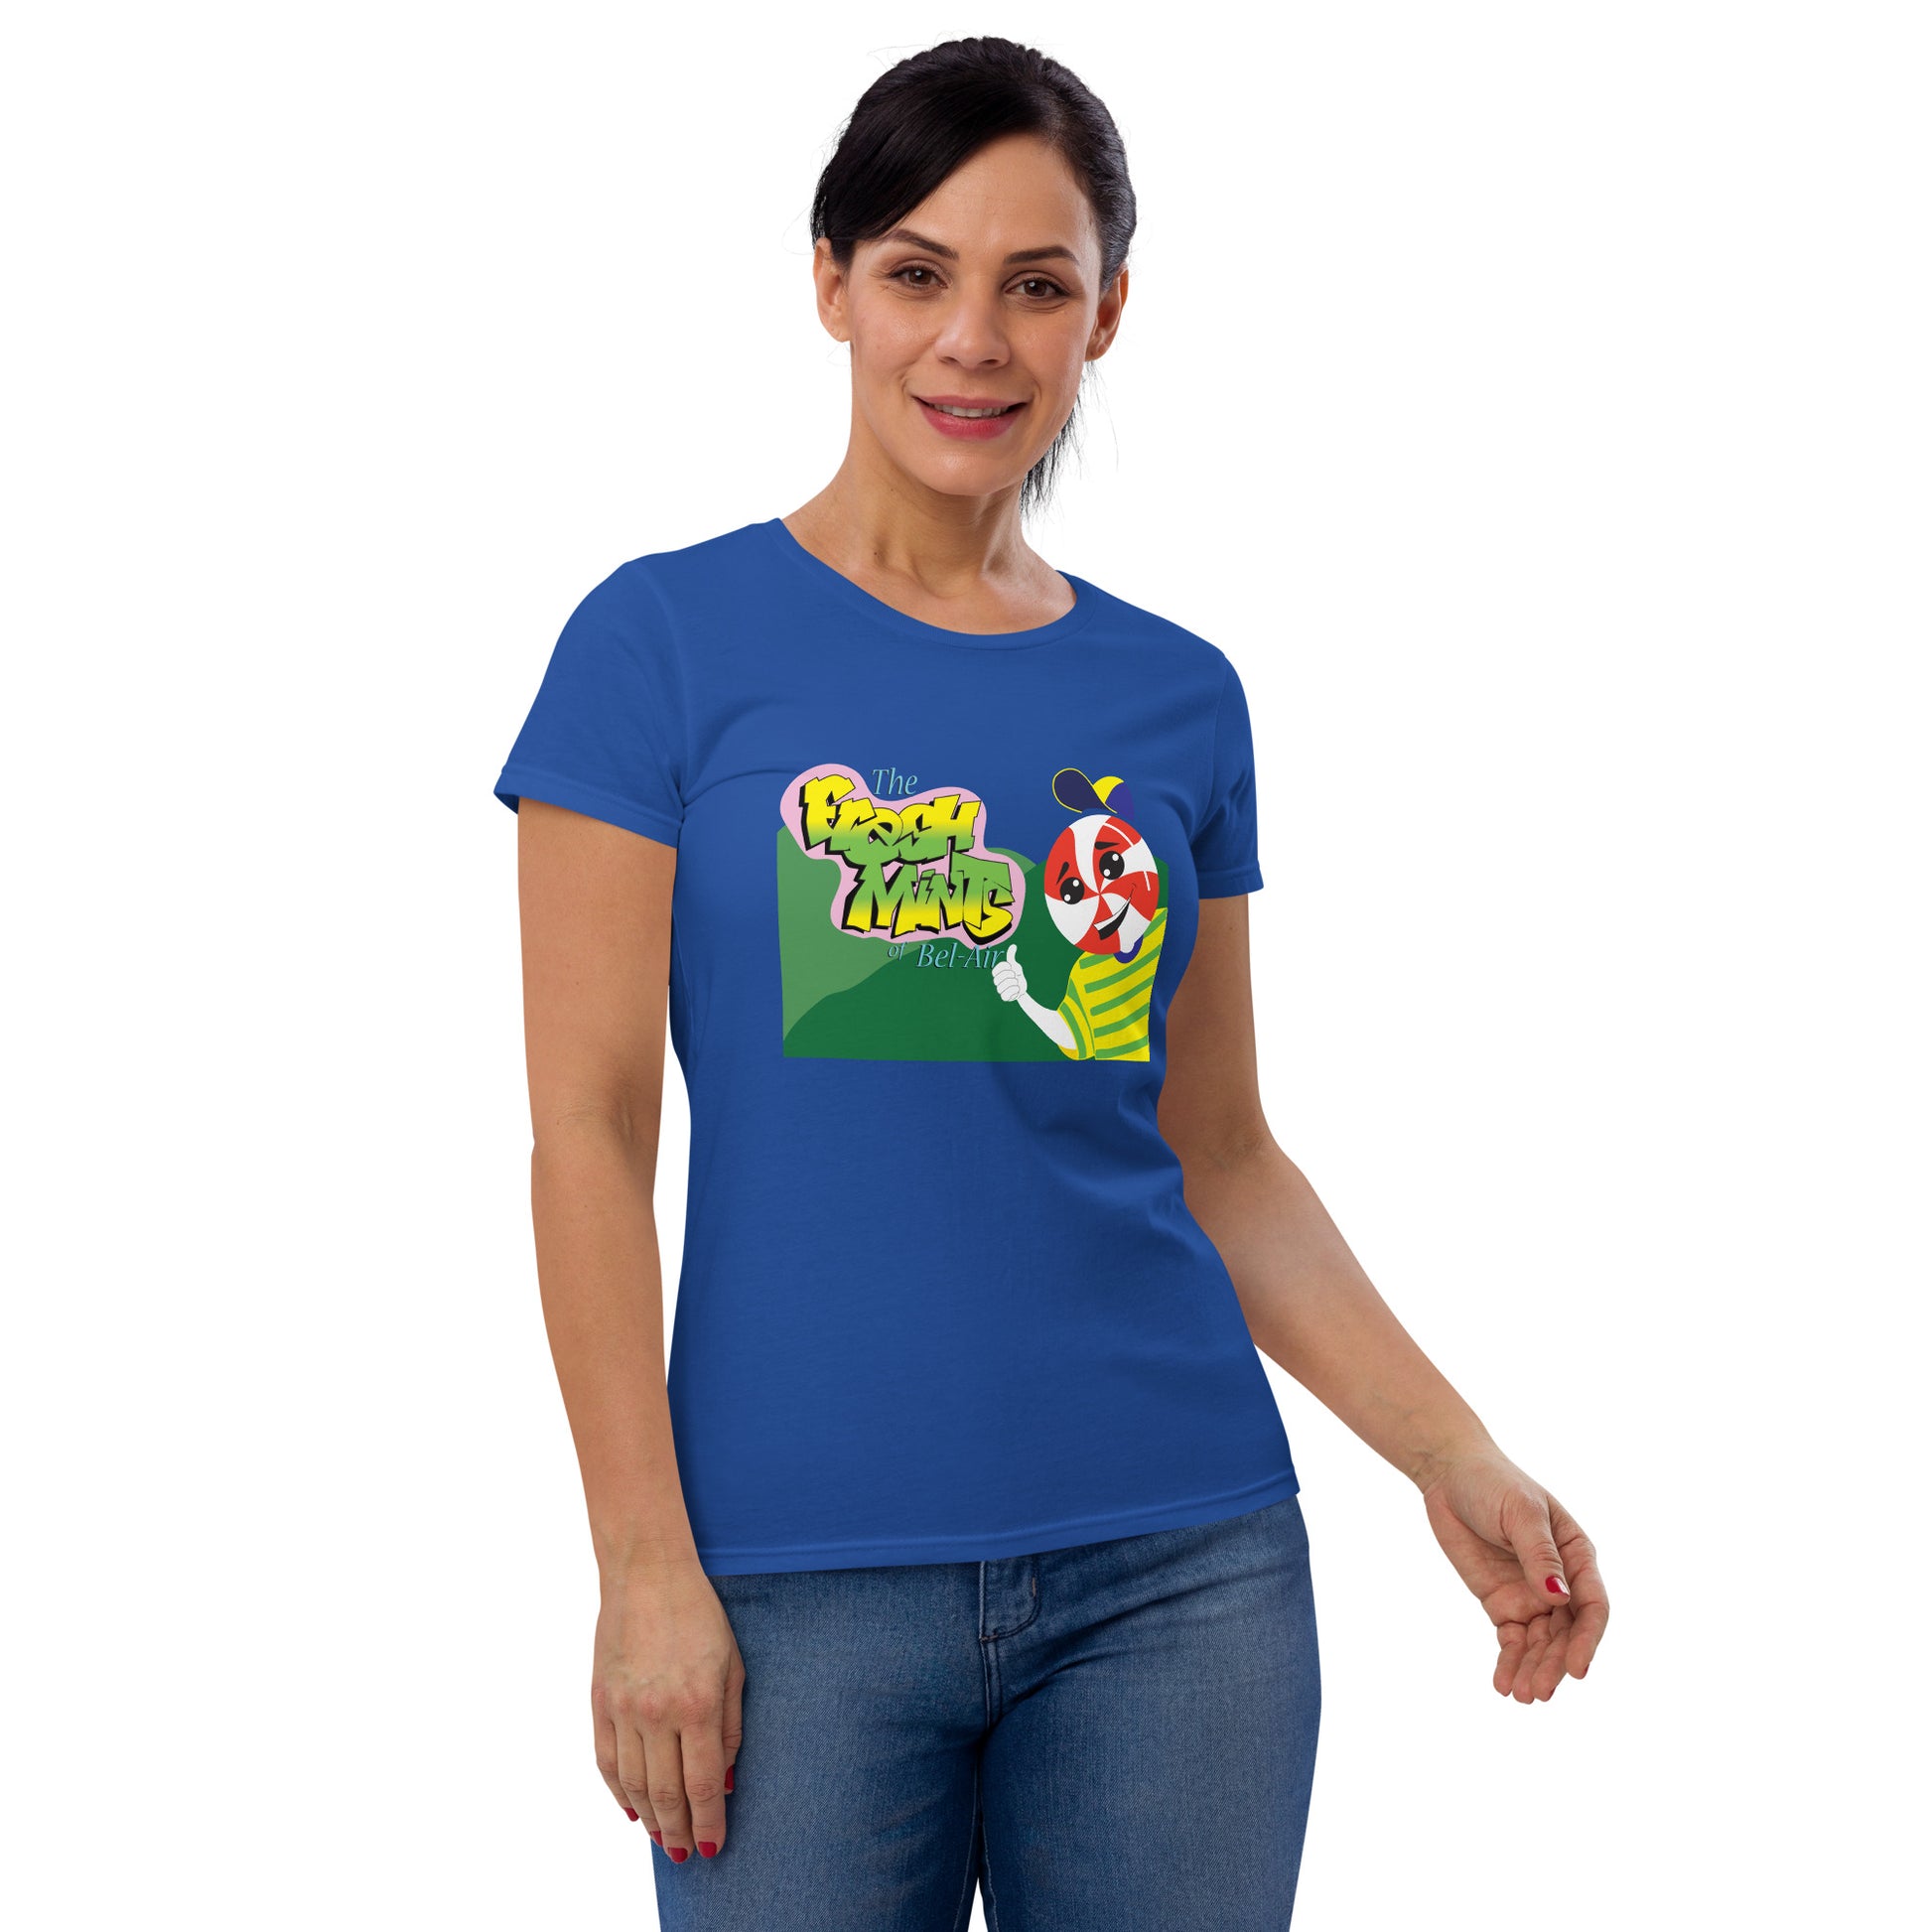 Movie The Food - The Fresh Mints Of Bel-Air Women's T-Shirt - Royal Blue - Model Front